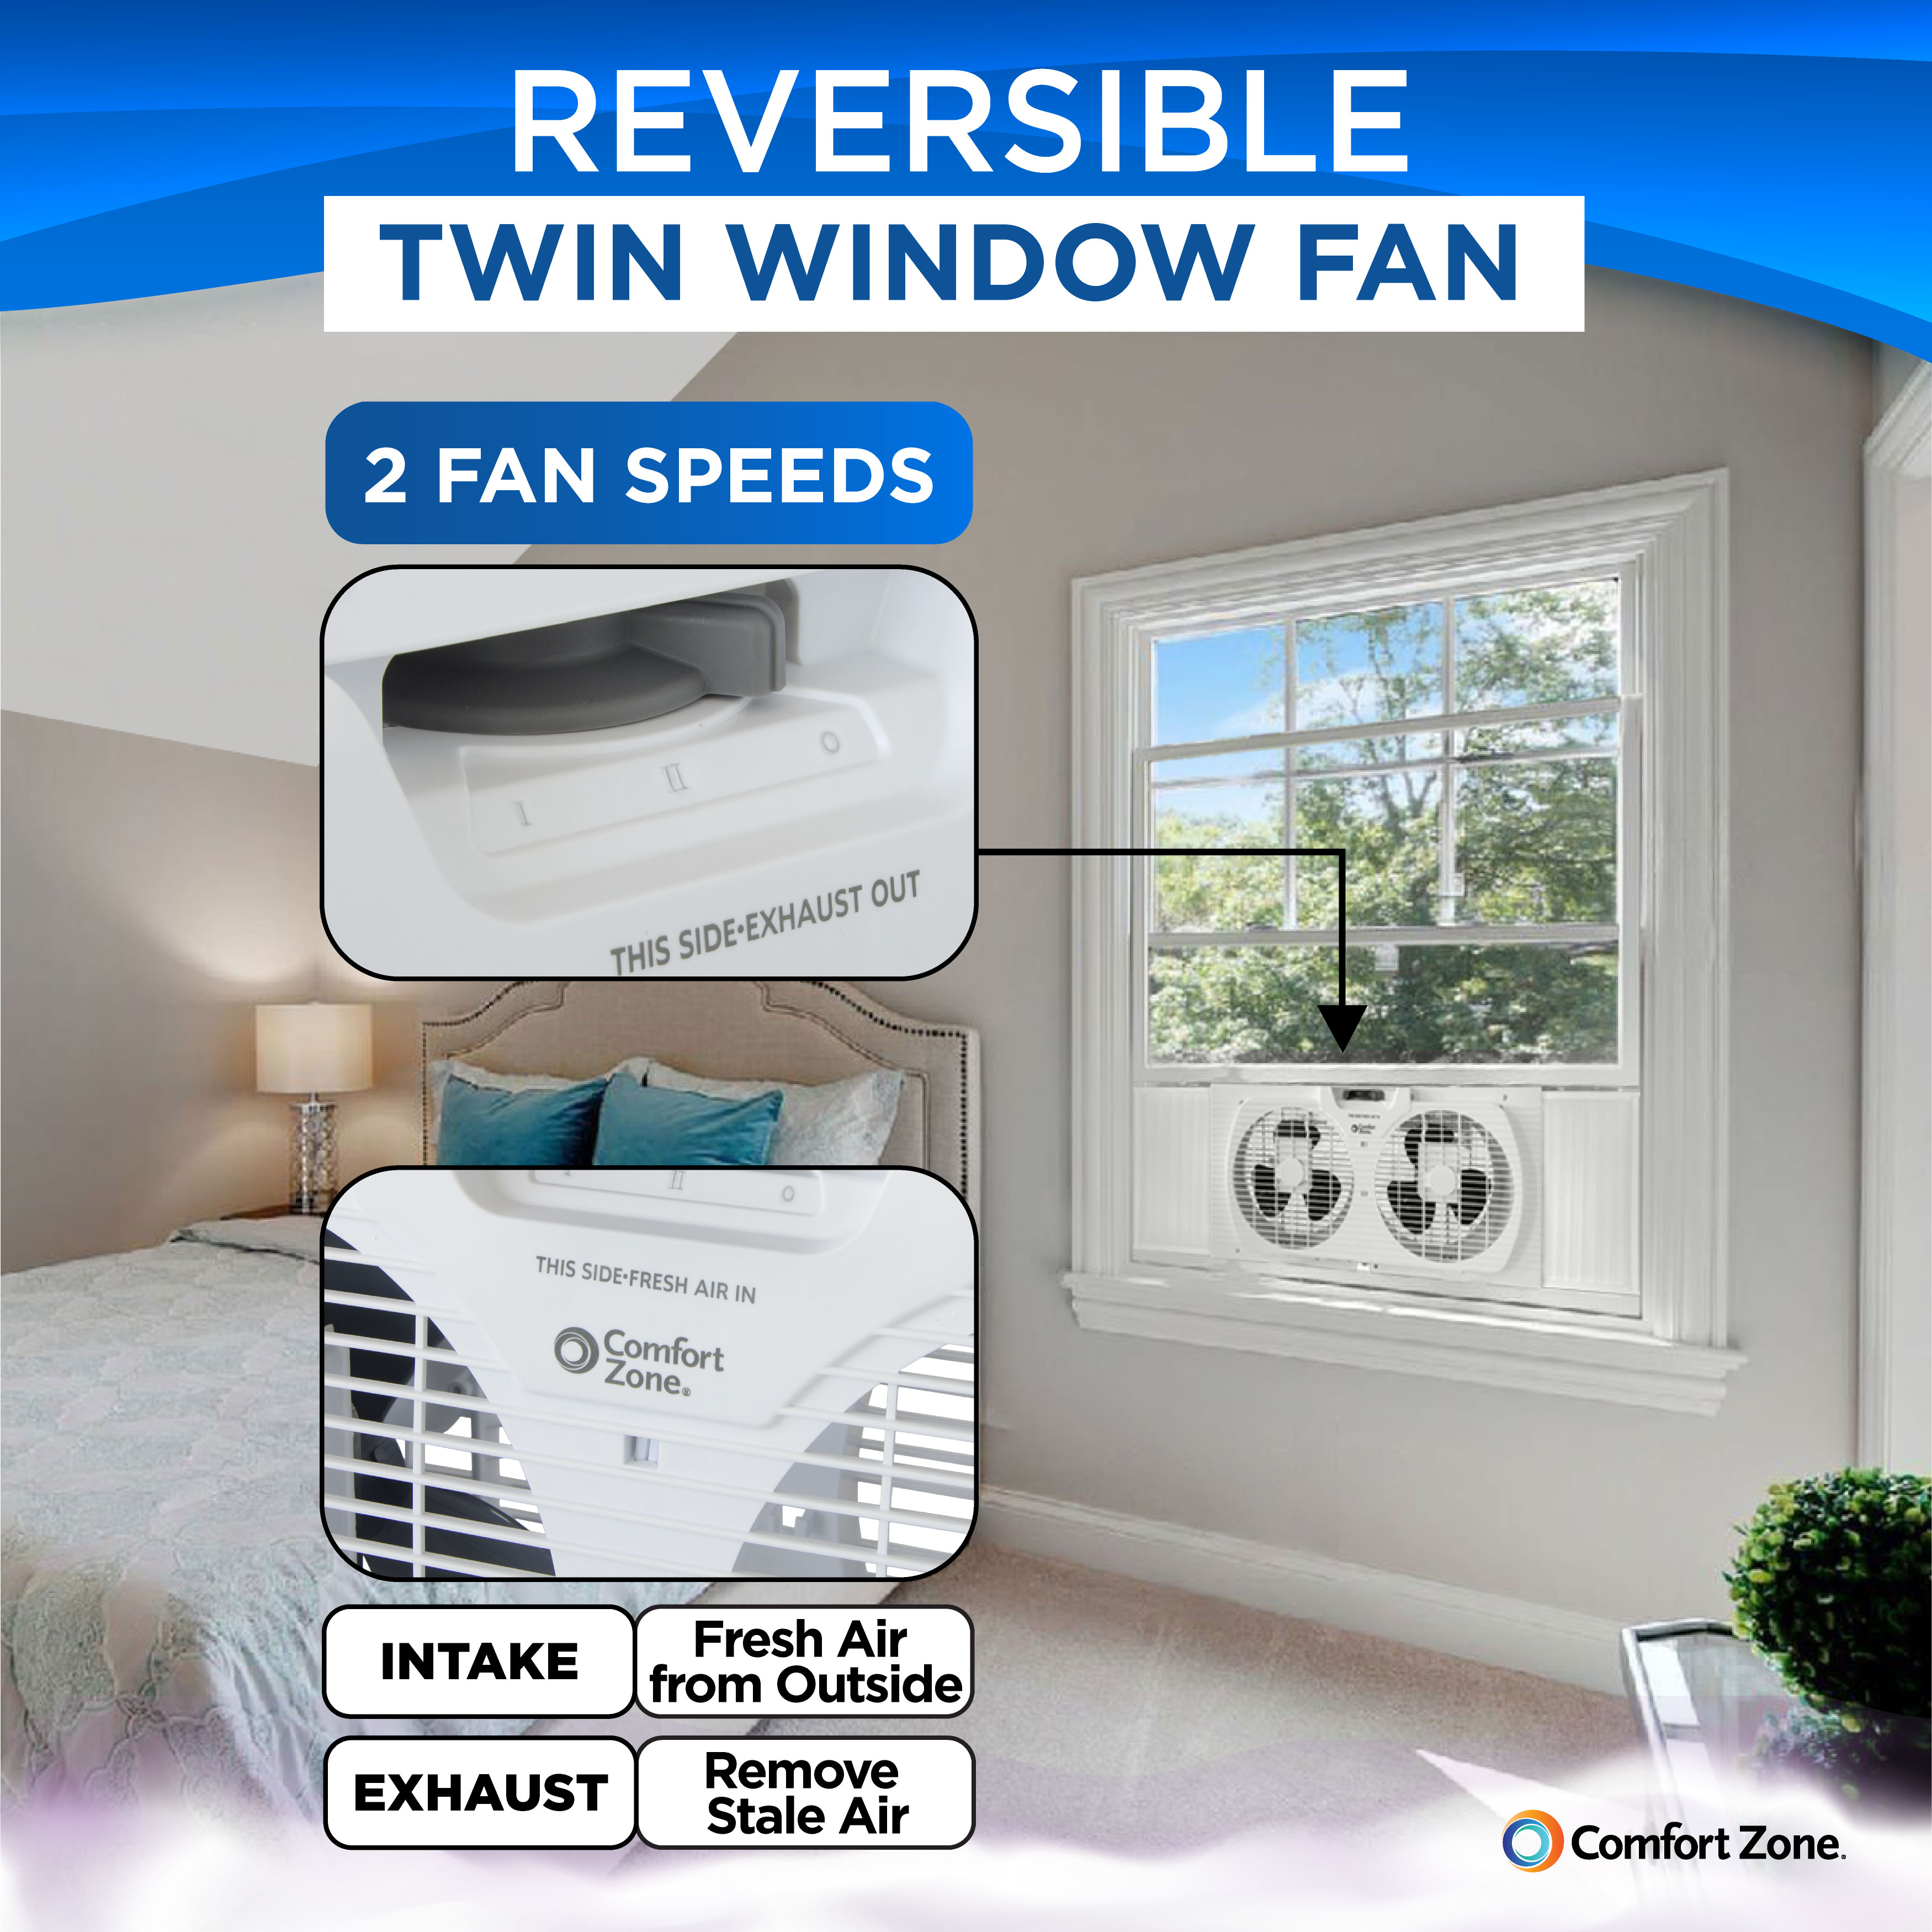 Comfort Zone 9" Twin Window Fan with Reversible Airflow Control, Auto-Locking Expanders and 2-Speed Fan Switch, White - image 4 of 7